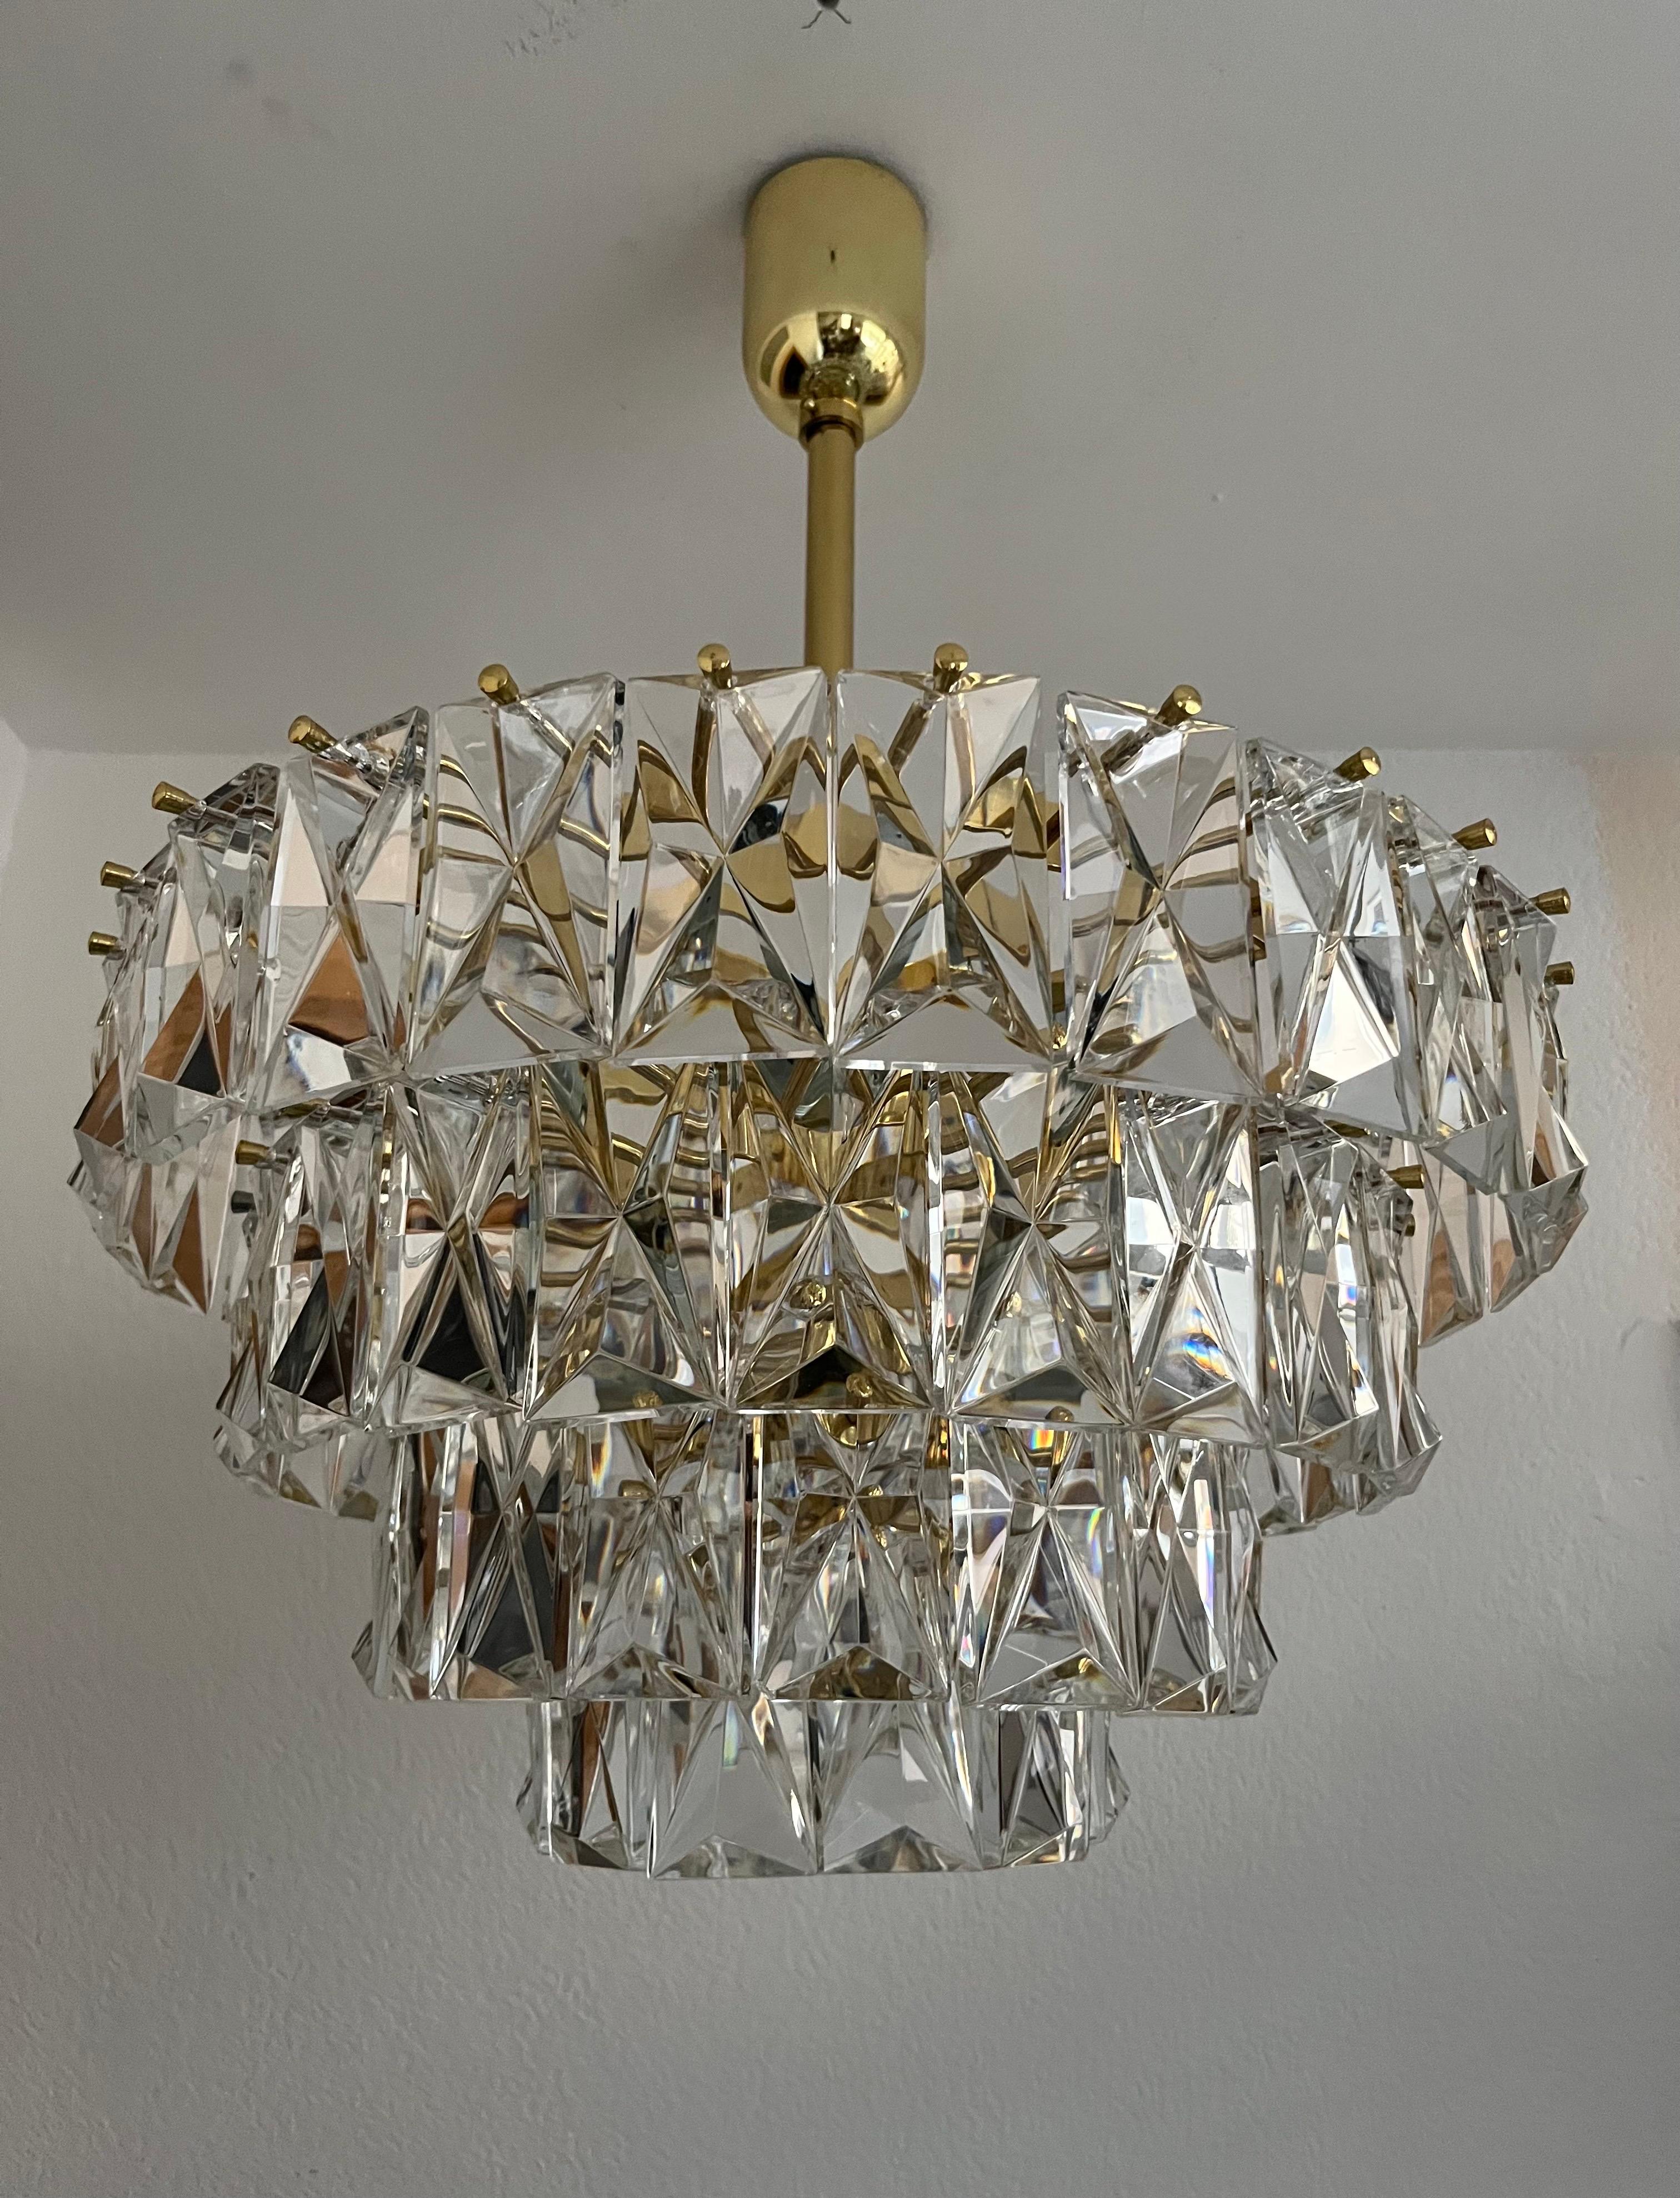 Beauty and stunning German midcentury crystal Kinkeldey Chandelier. This chandelier was made during the 1970s in Germany by Kinkeldey.
This Chandelier is composed by 76 units of crystals (+ one unit more as replacement) and gold brass